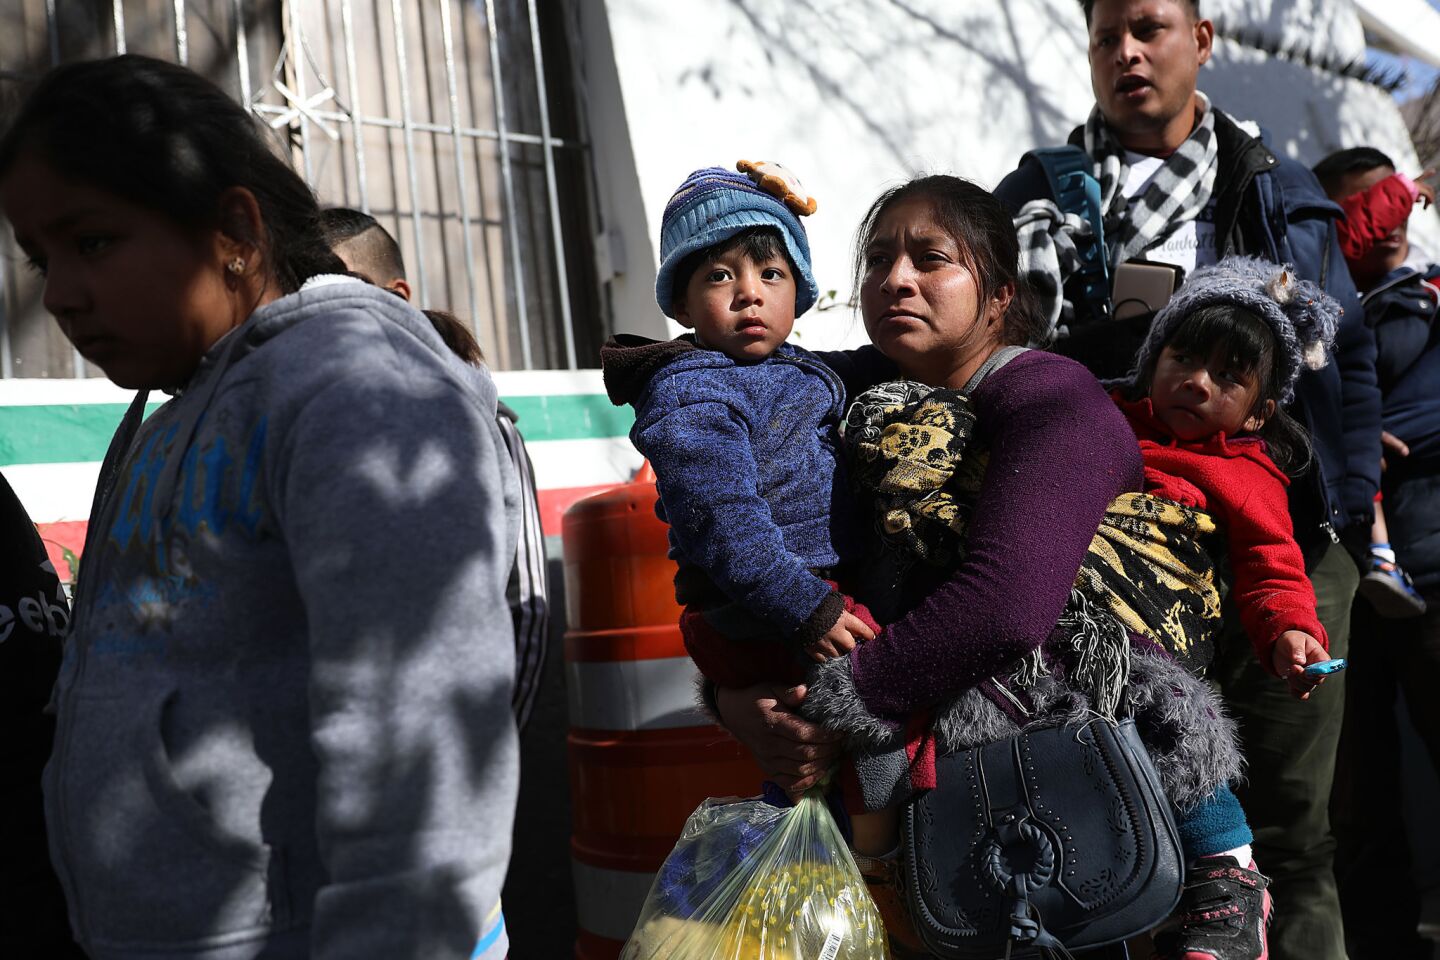 U.S. to require asylum seekers to remain in Mexico